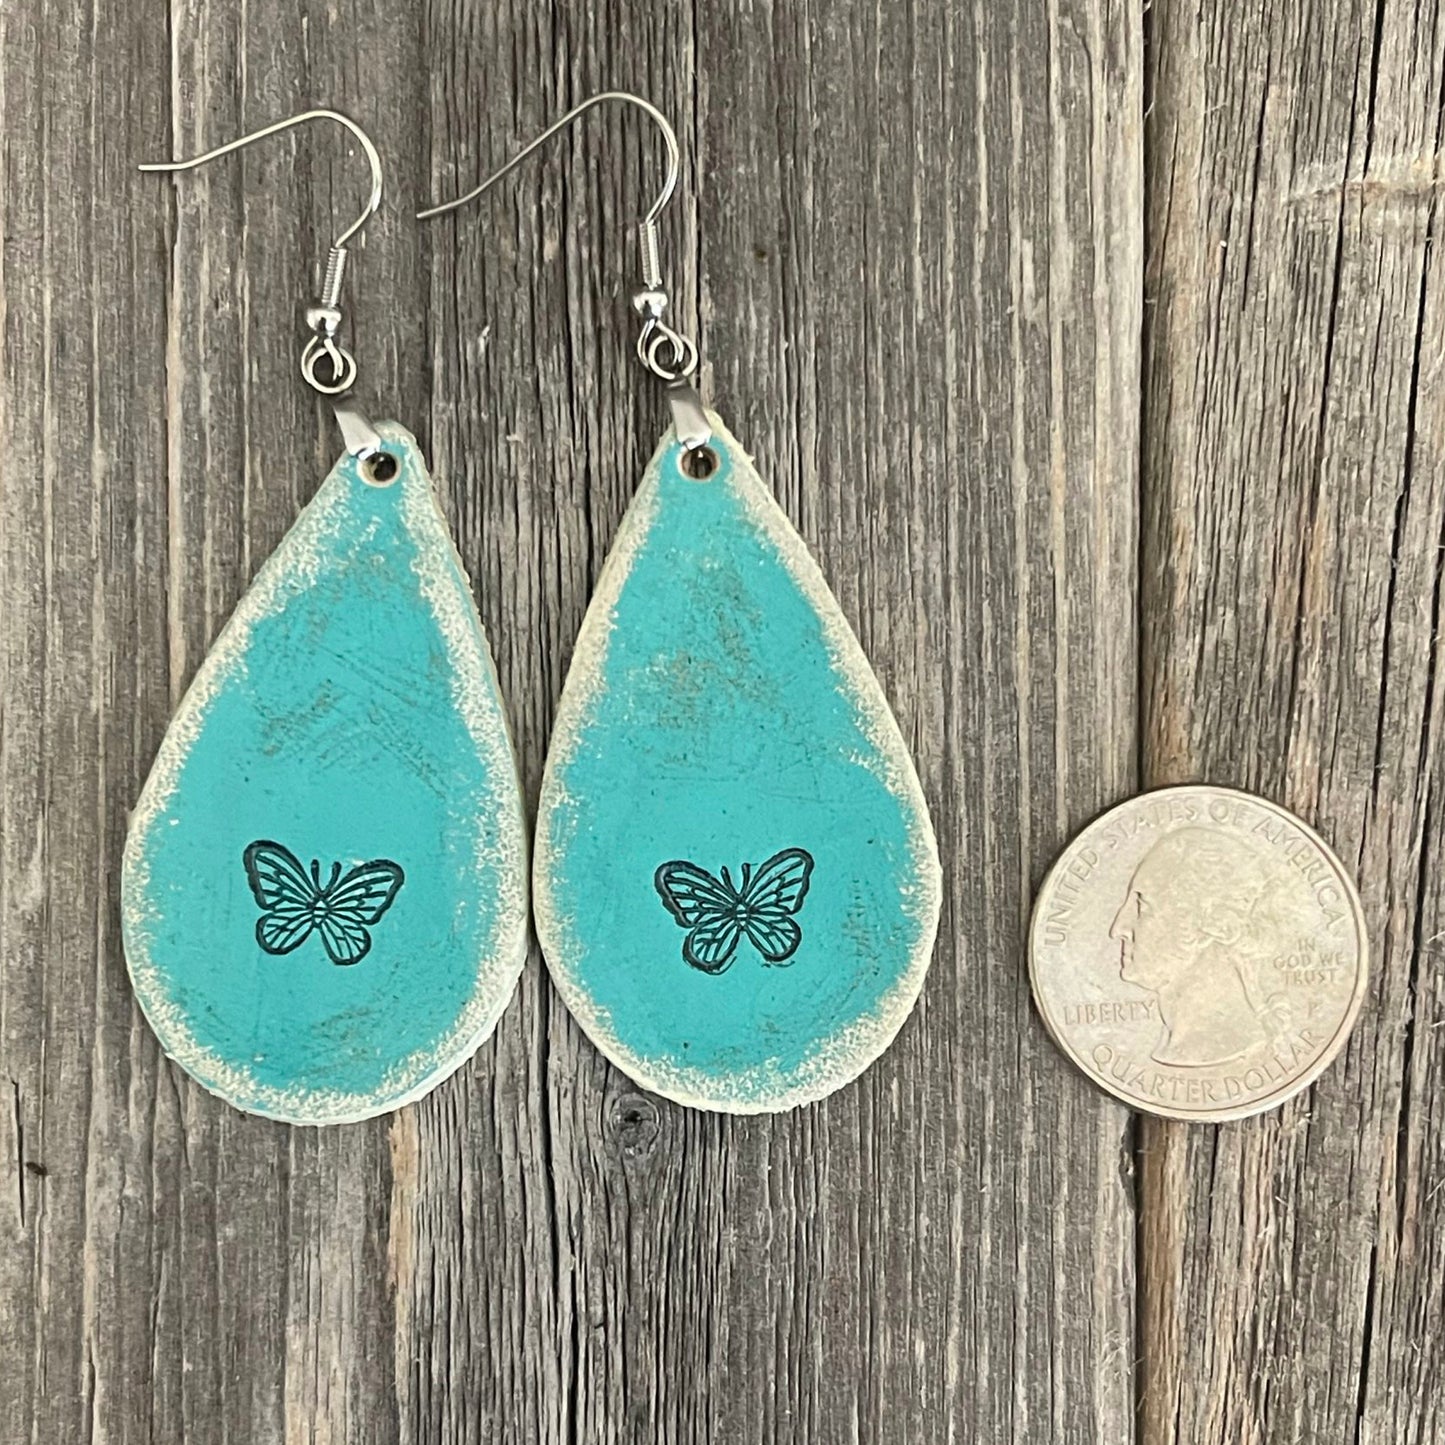 MADE TO ORDER - Leather Boho Earrings with Rustic Butterfly